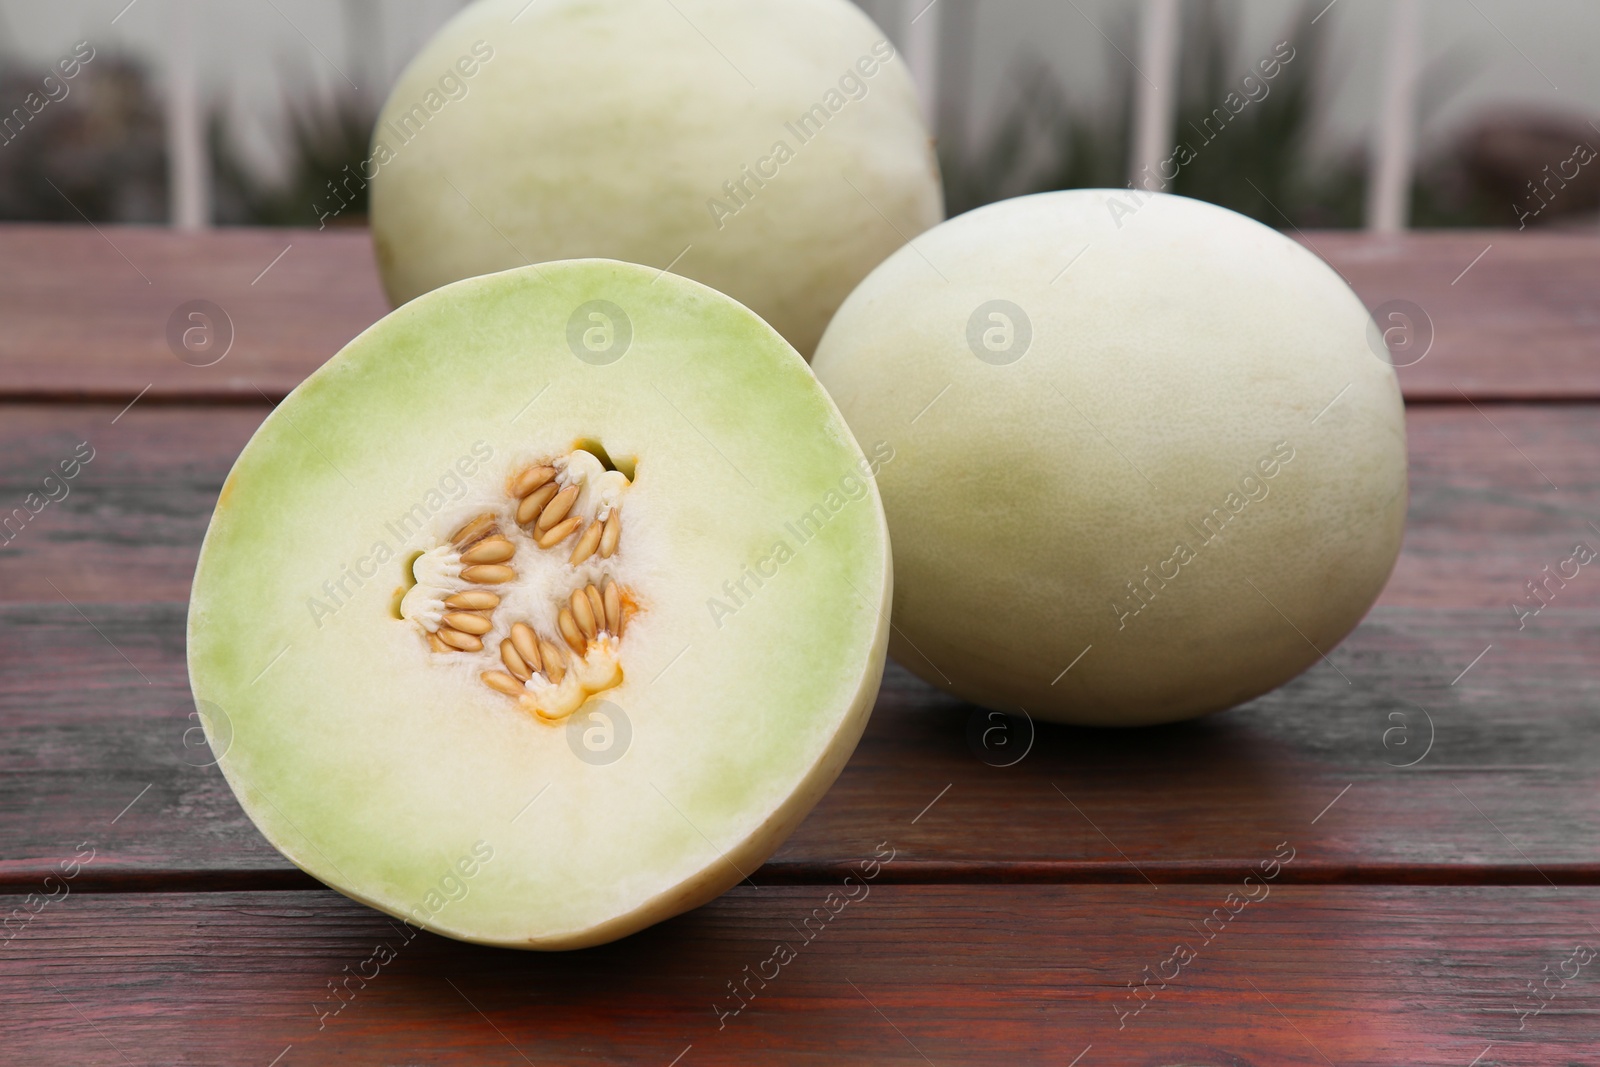 Photo of Whole and cut fresh ripe melons on wooden table outdoors